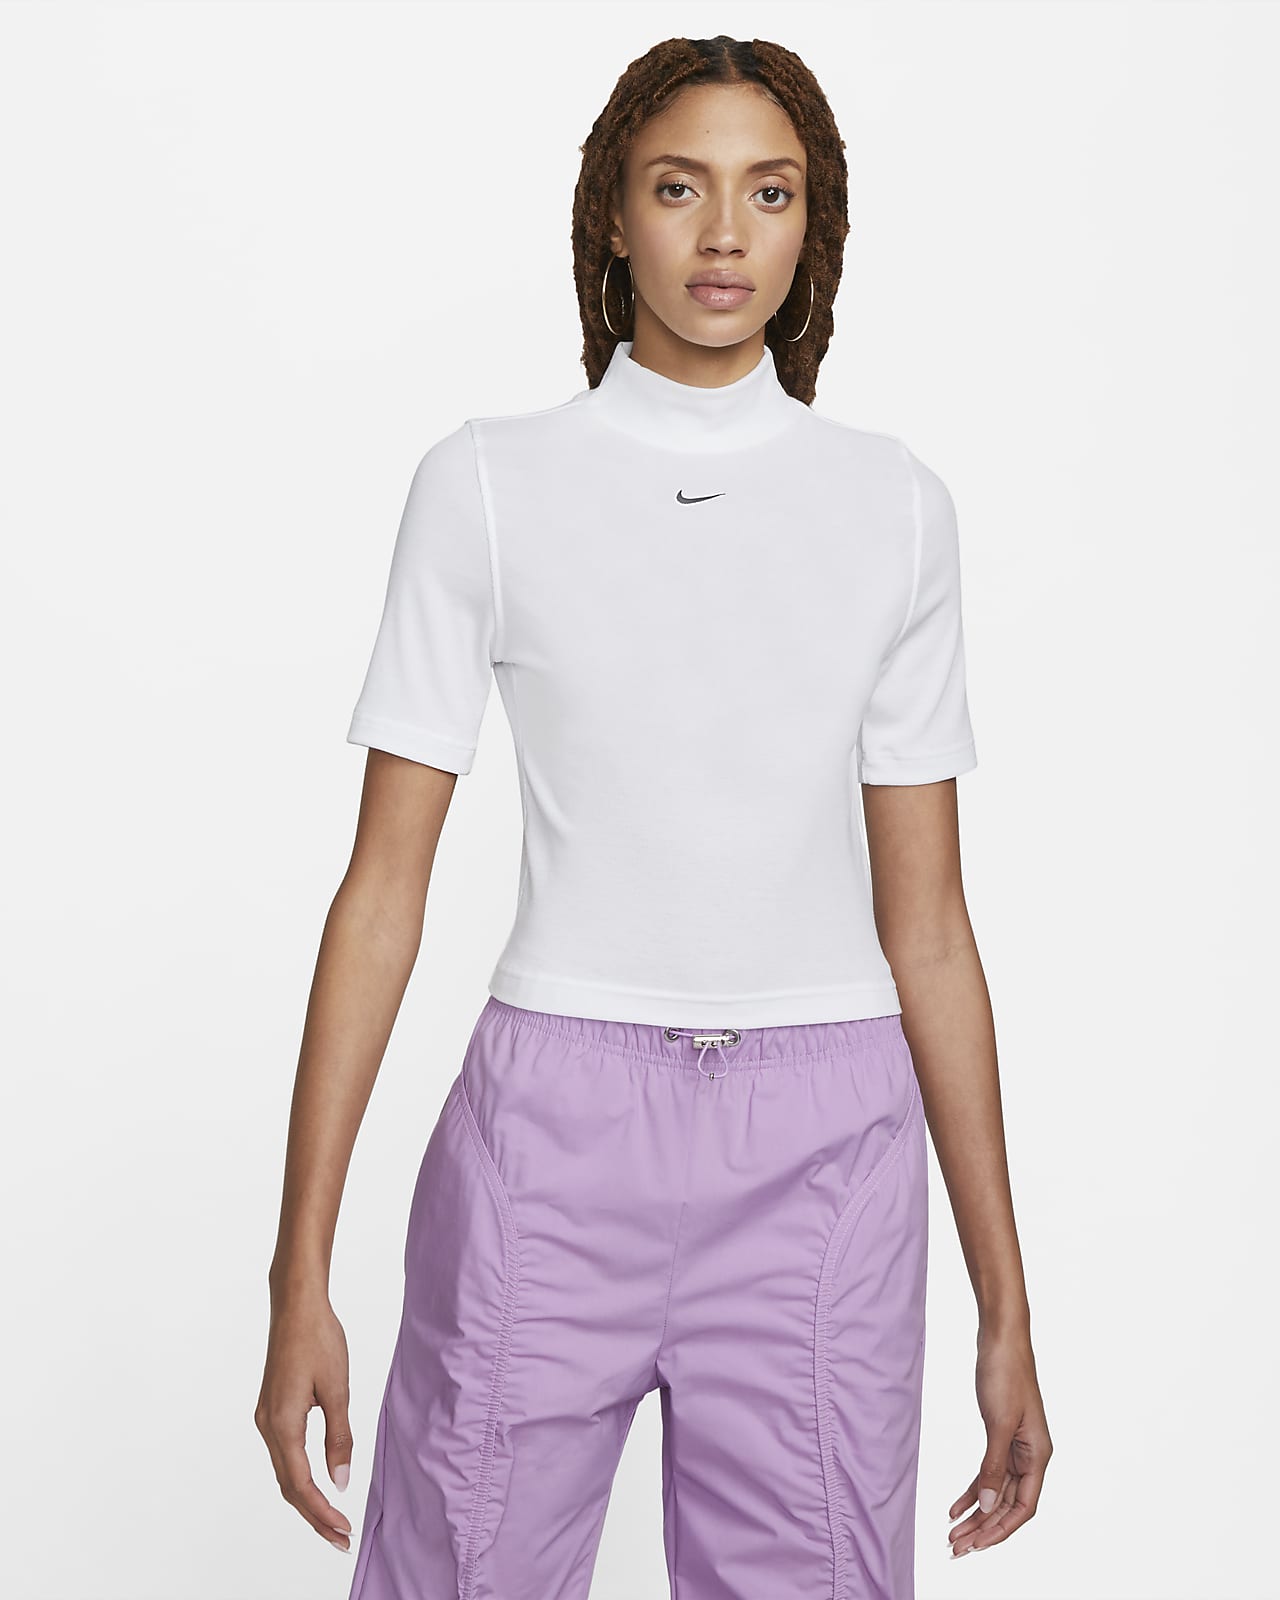 https://static.nike.com/a/images/t_PDP_1280_v1/f_auto,q_auto:eco/b3d7f5d4-643f-4840-a56d-7e4a8271c3cb/sportswear-essentials-womens-ribbed-mock-neck-short-sleeve-top-FLF0mV.png